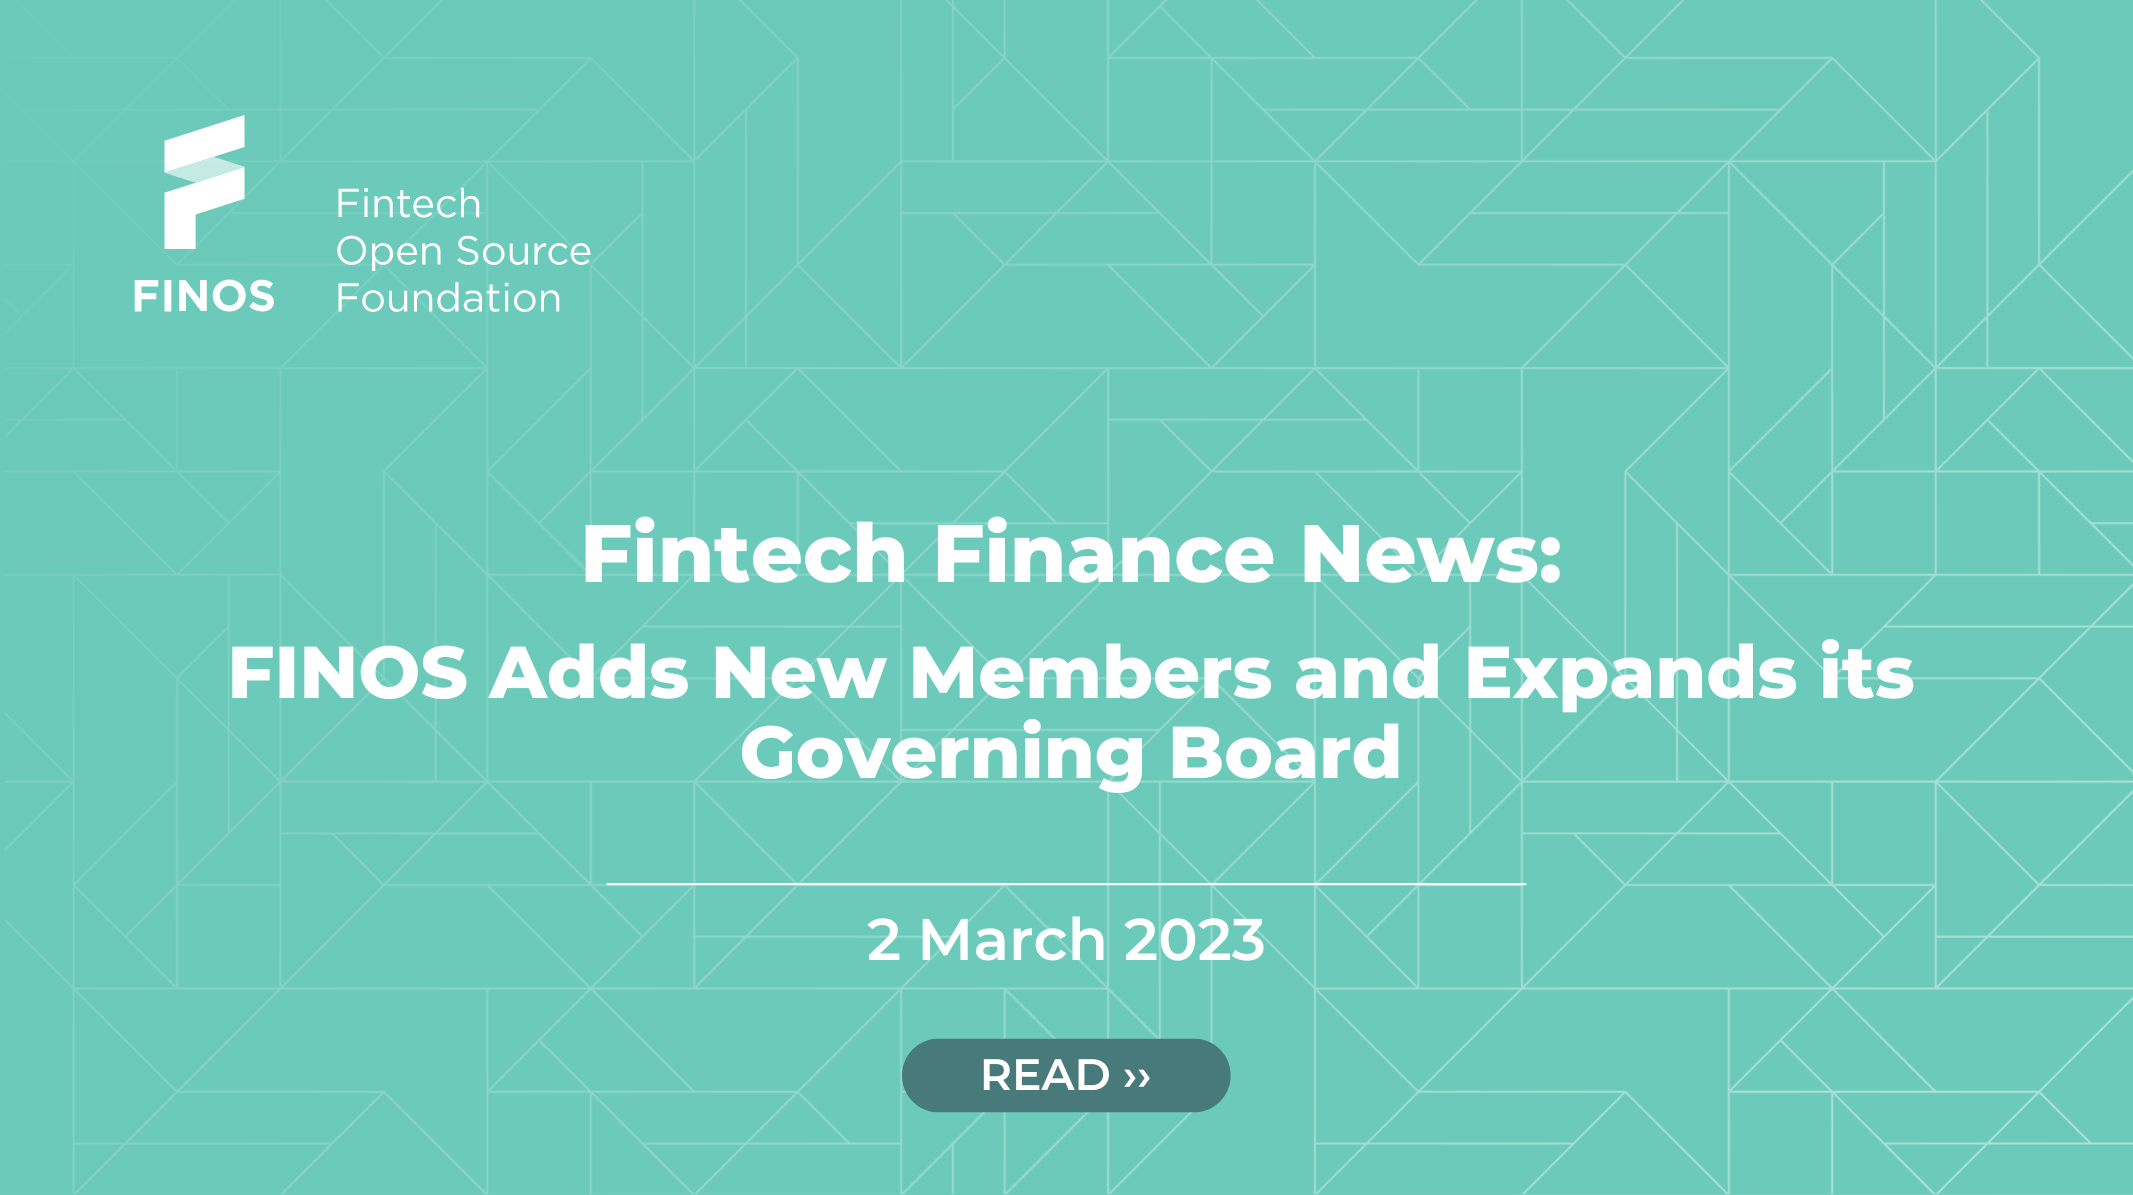 Fintech Finance News: FINOS Adds New Members and Expands its Governing Board